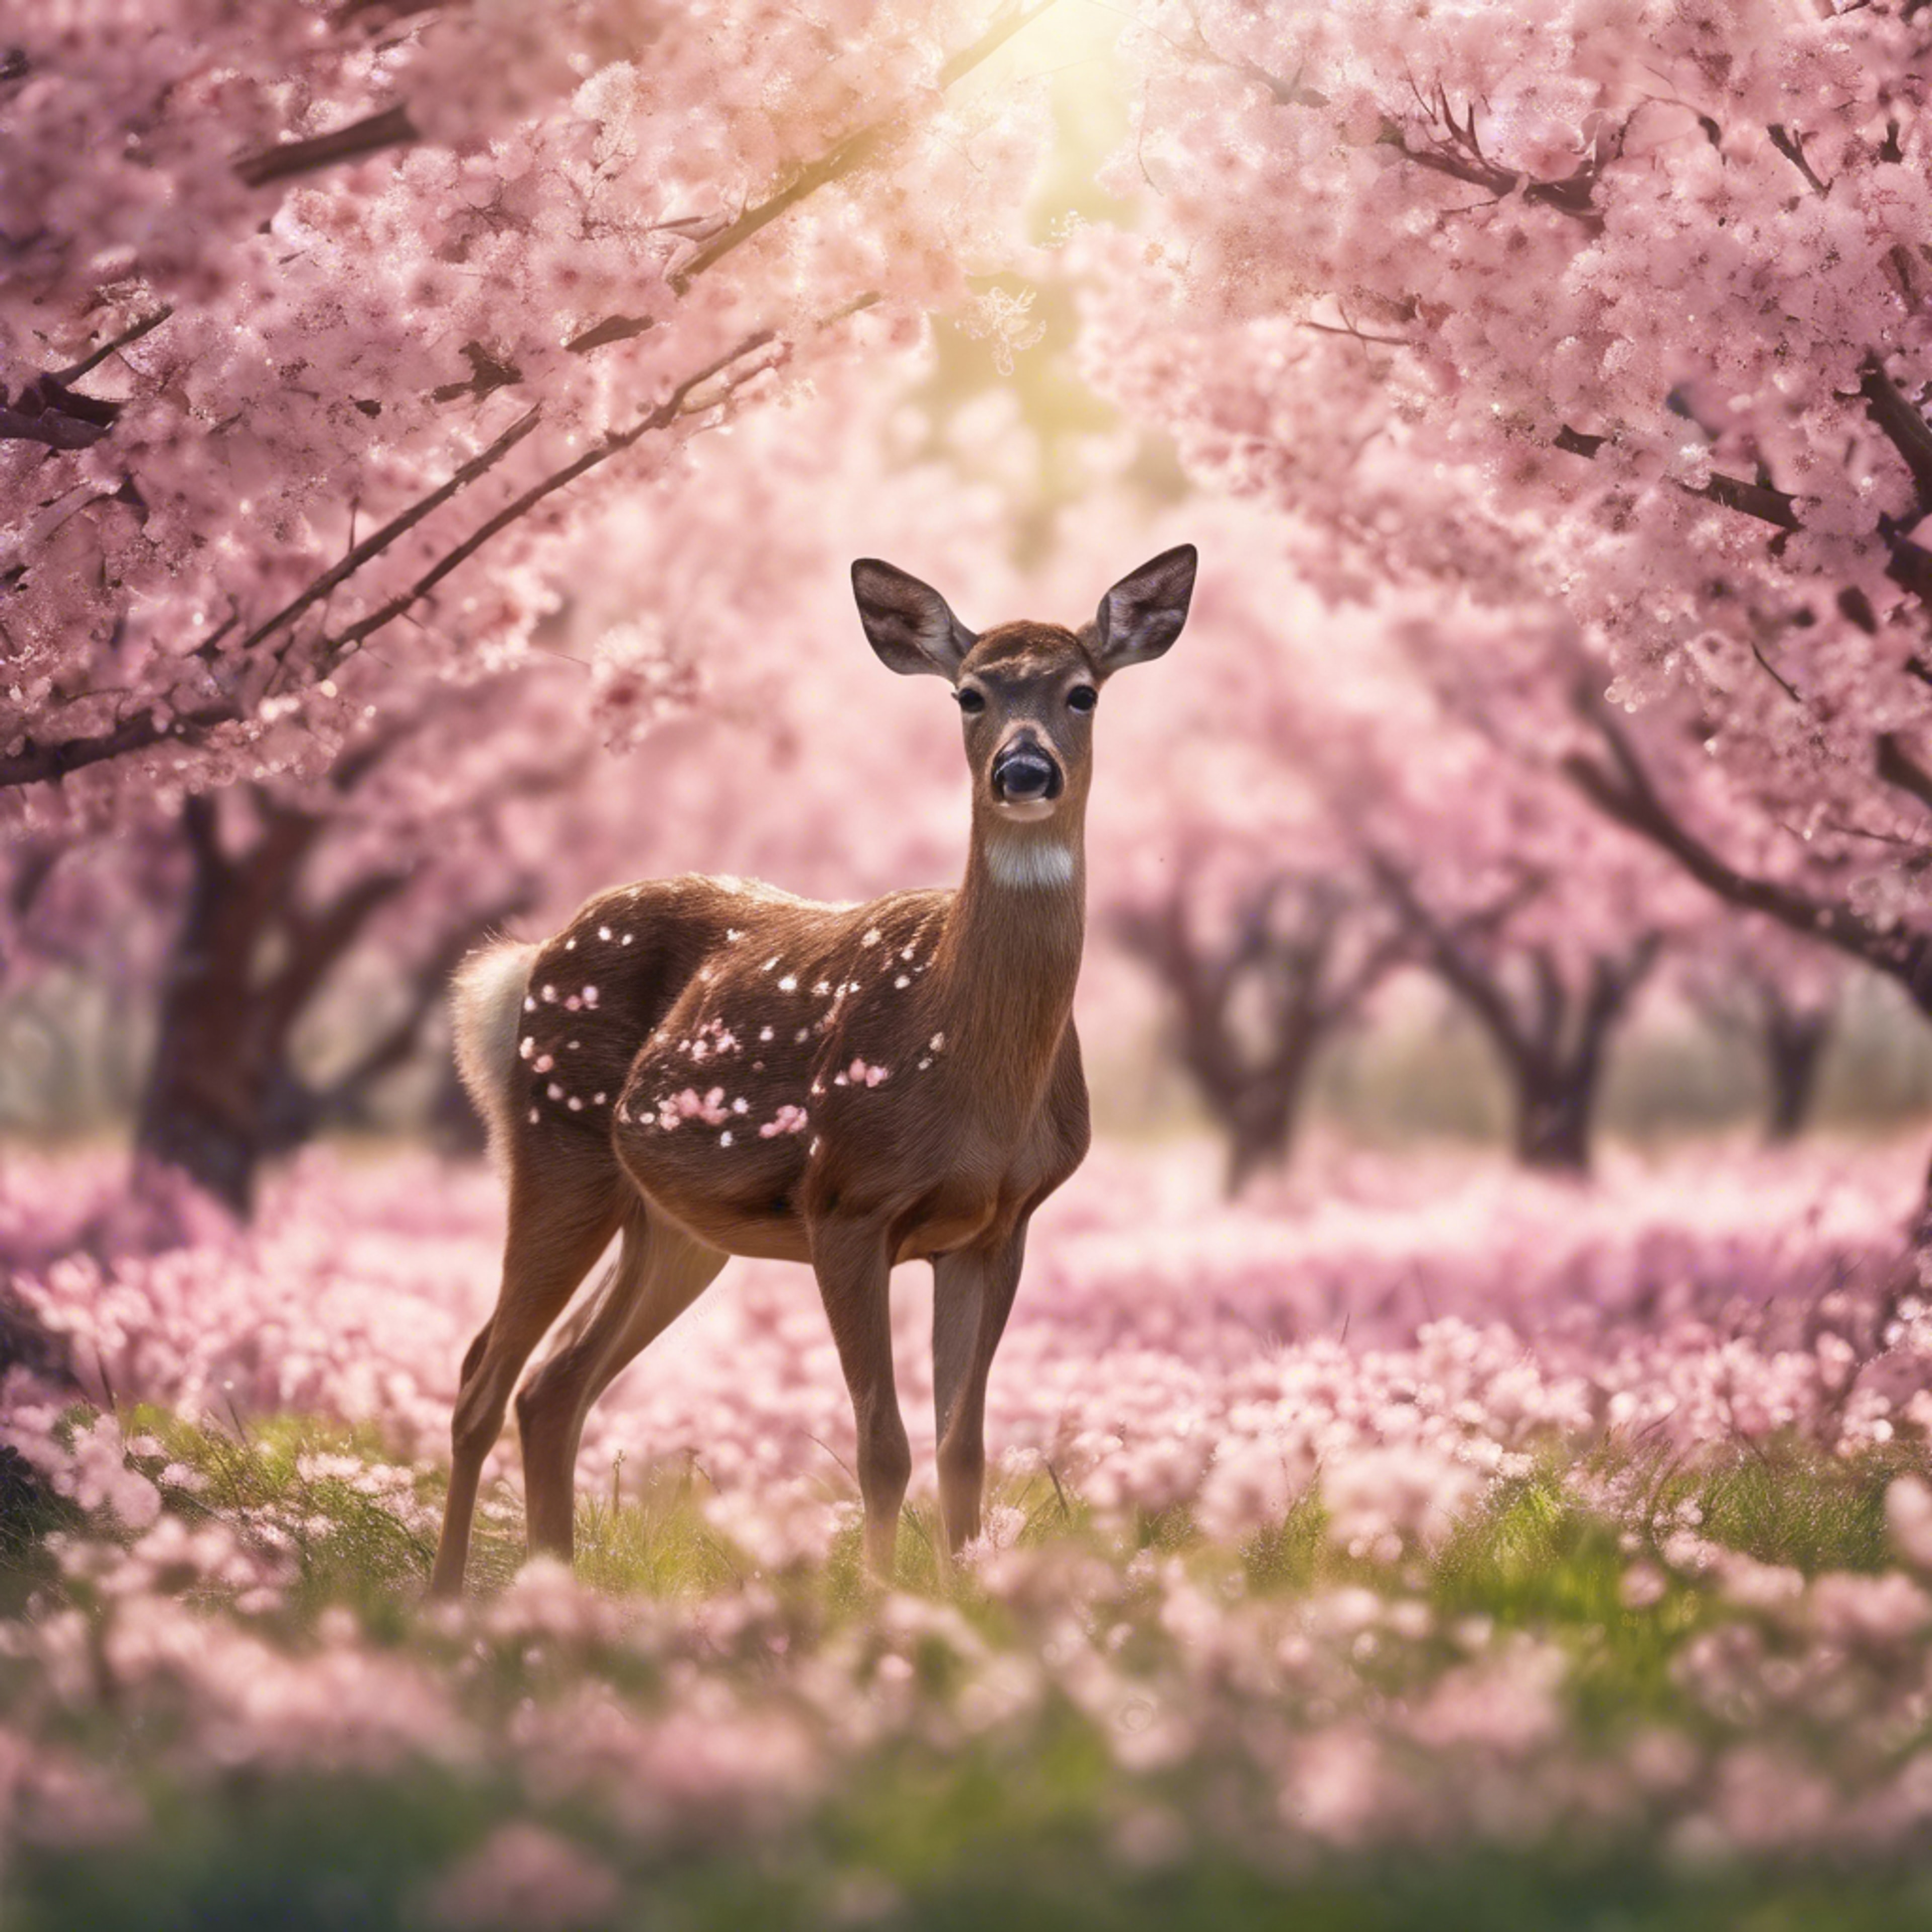 An illustration of a young deer grazing in a field of blooming cherry trees. Wallpaper[a2b025554c3c4b6aabc3]